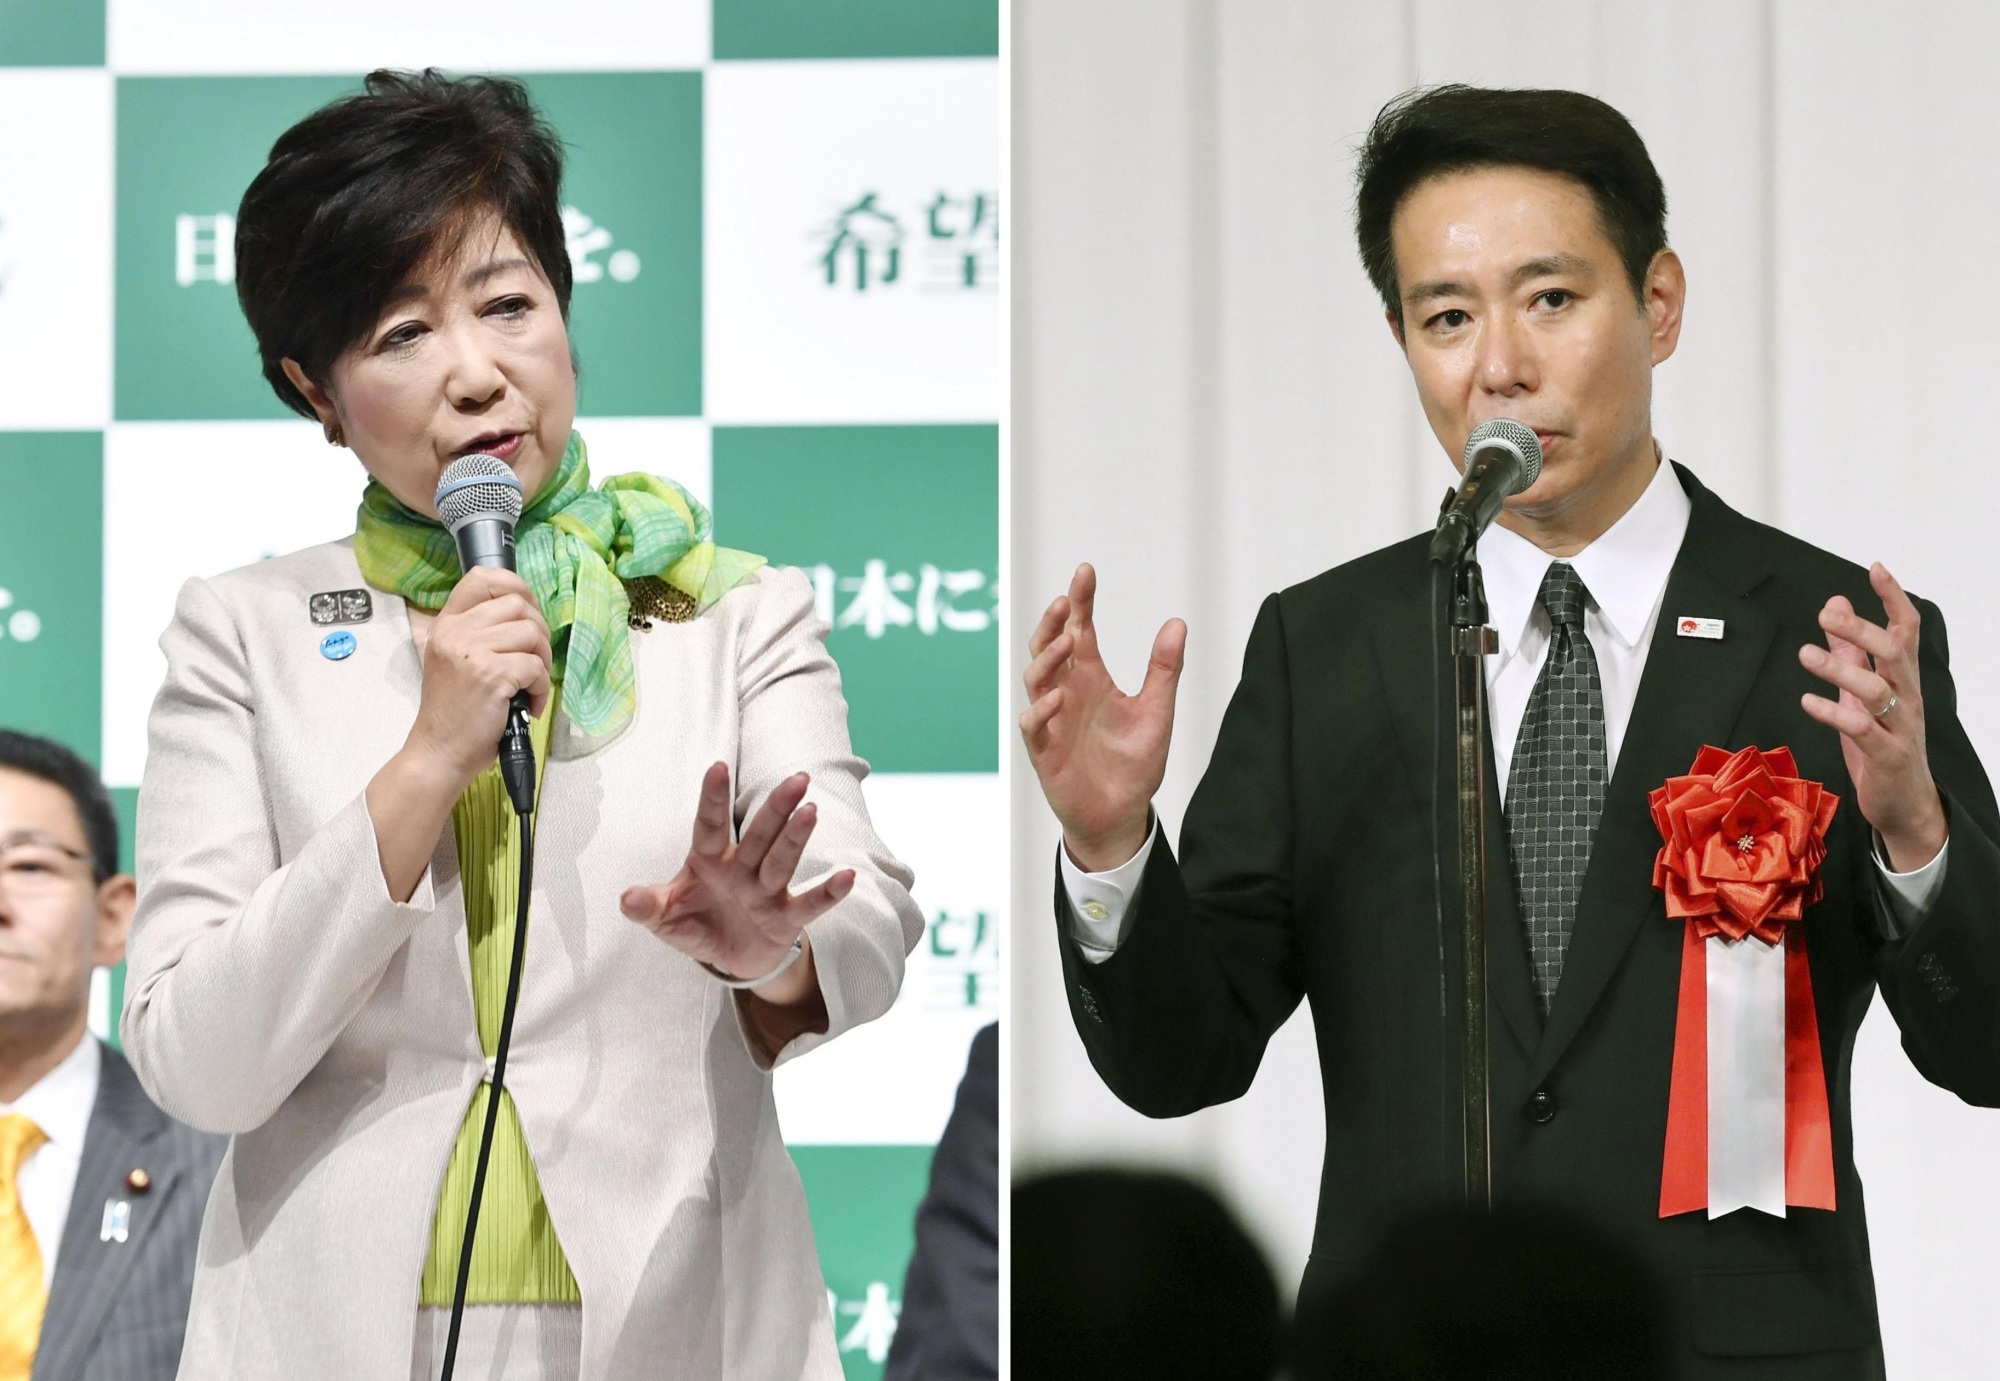 Democratic Party leader Seiji Maehara is considering letting the party's members run under Yuriko Koike's new party Kibo no To in the coming Lower House election, sources said Wednesday. | KYODO